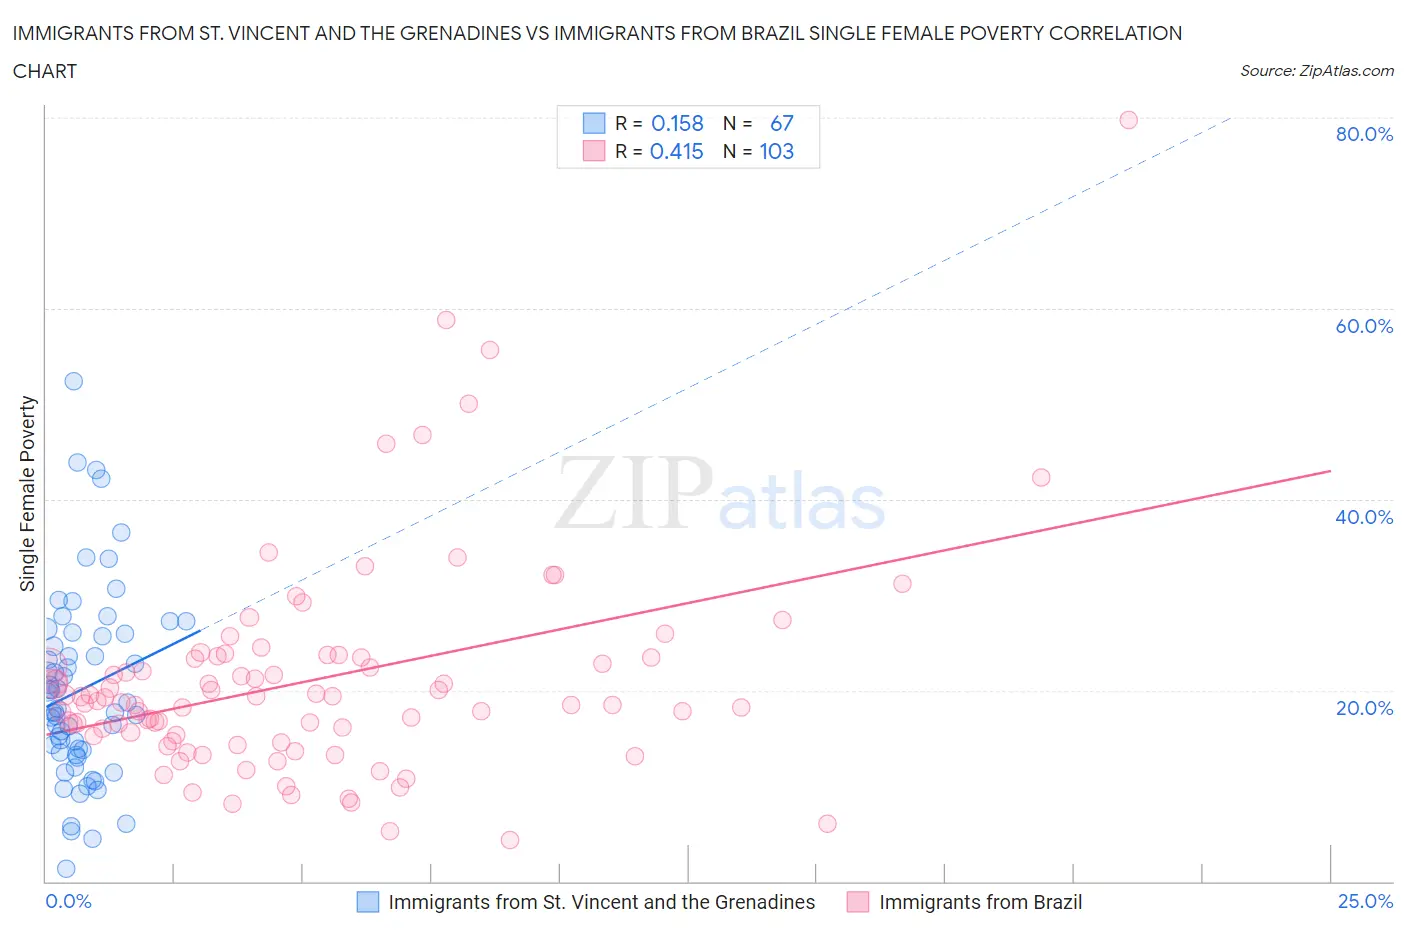 Immigrants from St. Vincent and the Grenadines vs Immigrants from Brazil Single Female Poverty